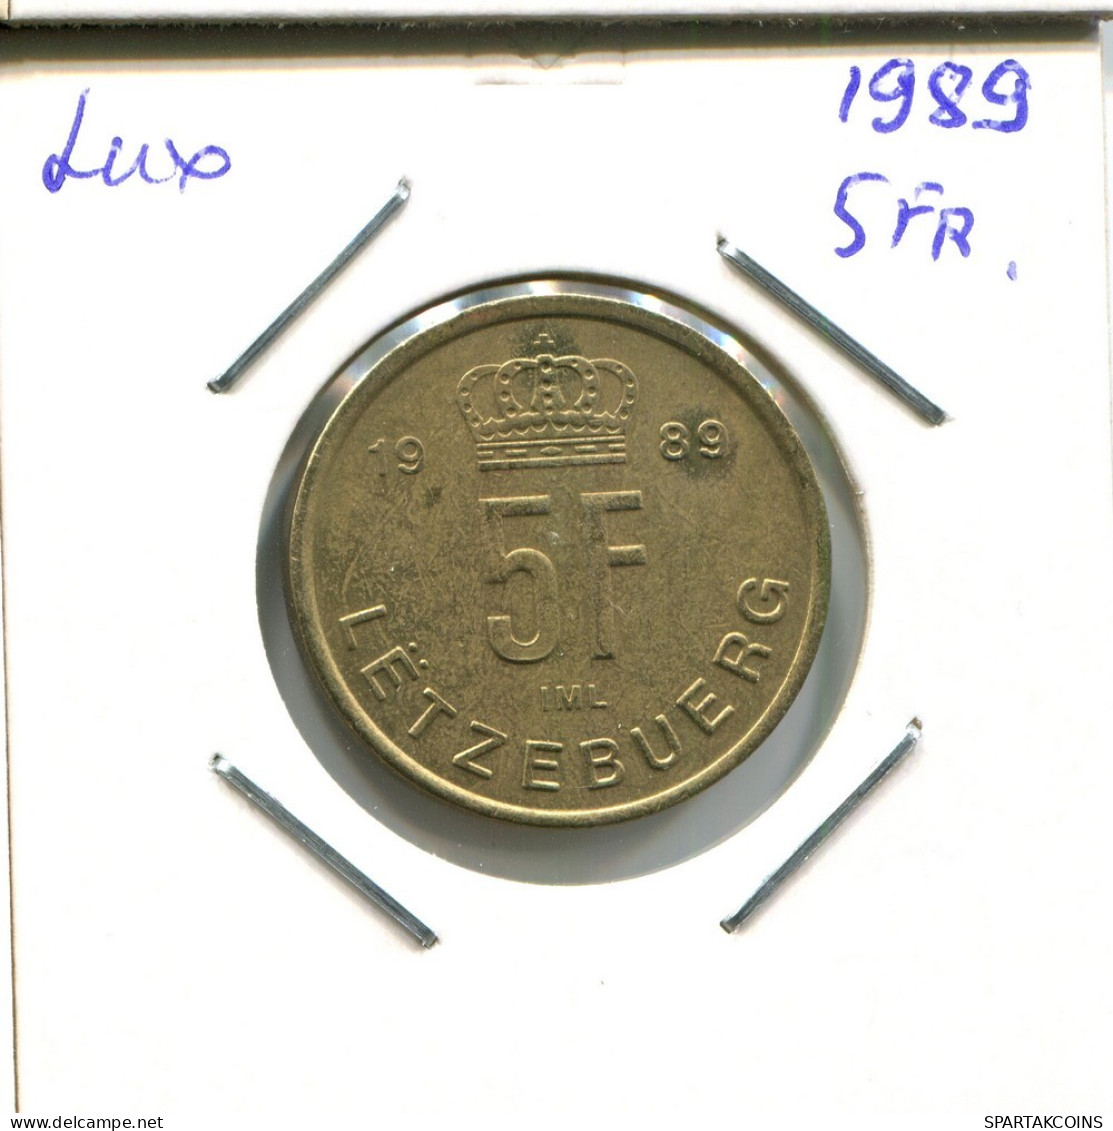 5 FRANCS 1989 LUXEMBURG LUXEMBOURG Münze #AT236.D.A - Luxembourg